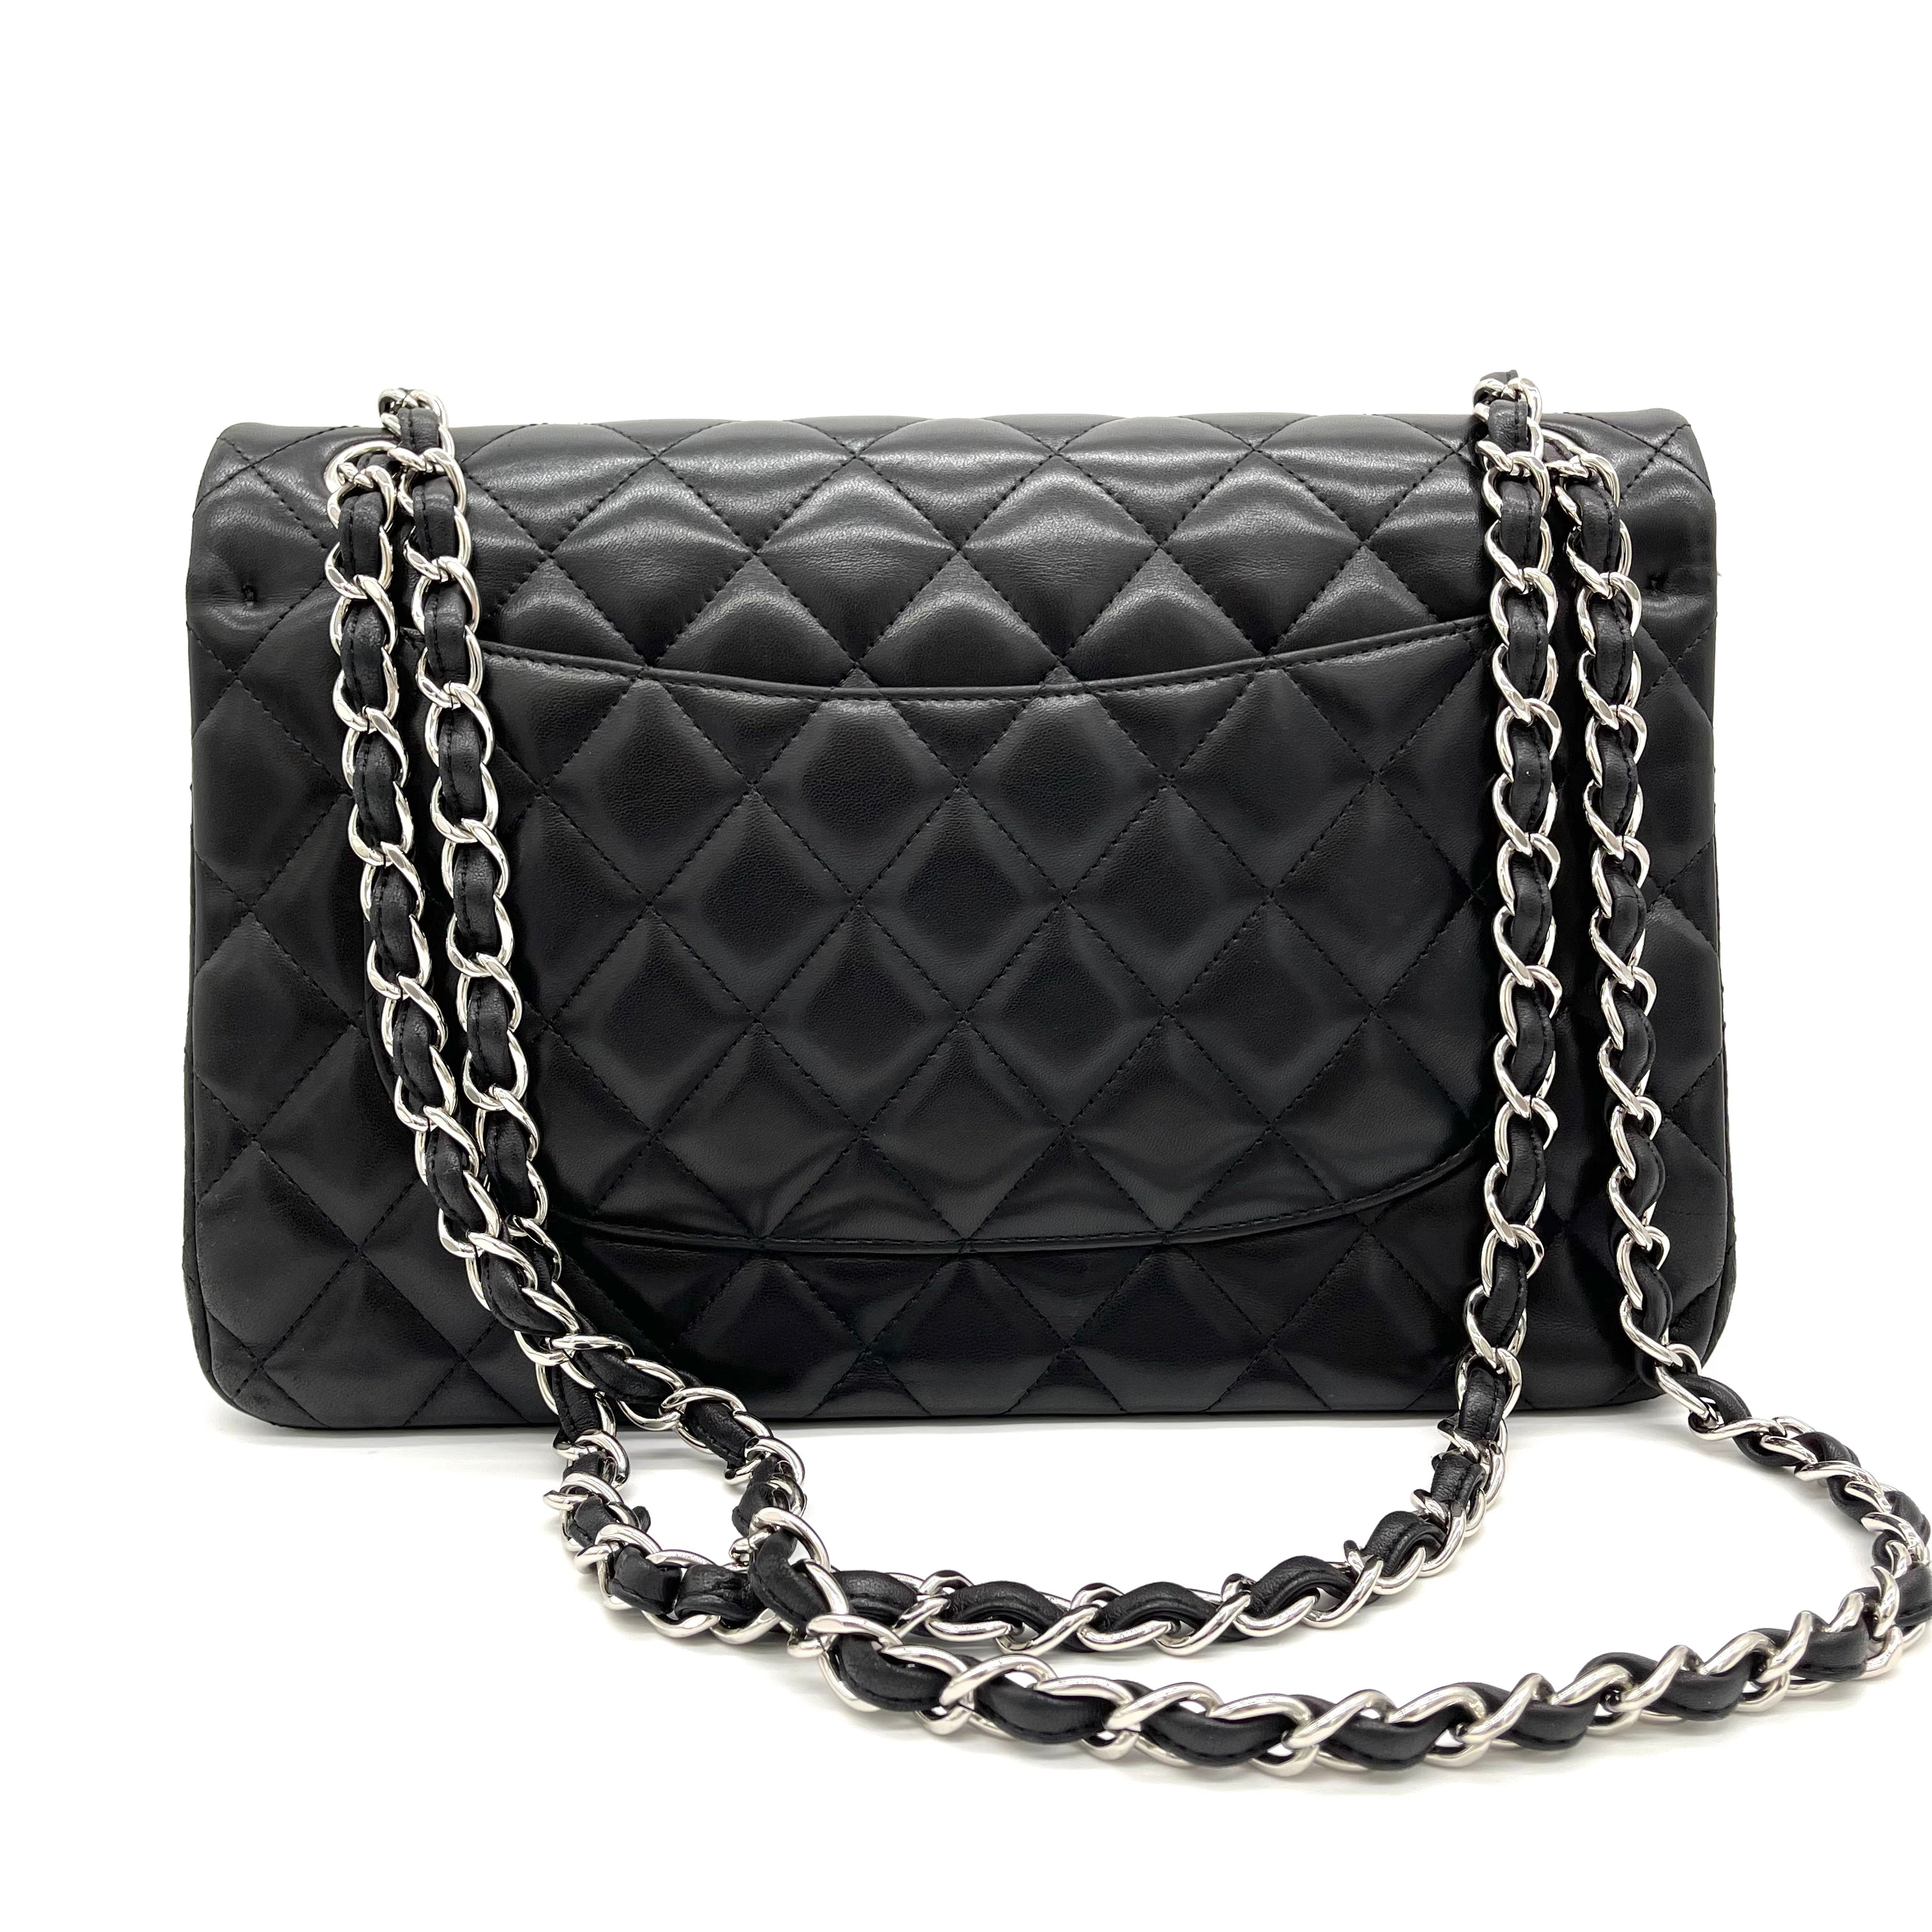 CHANEL Lambskin Quilted Jumbo Double Flap Black